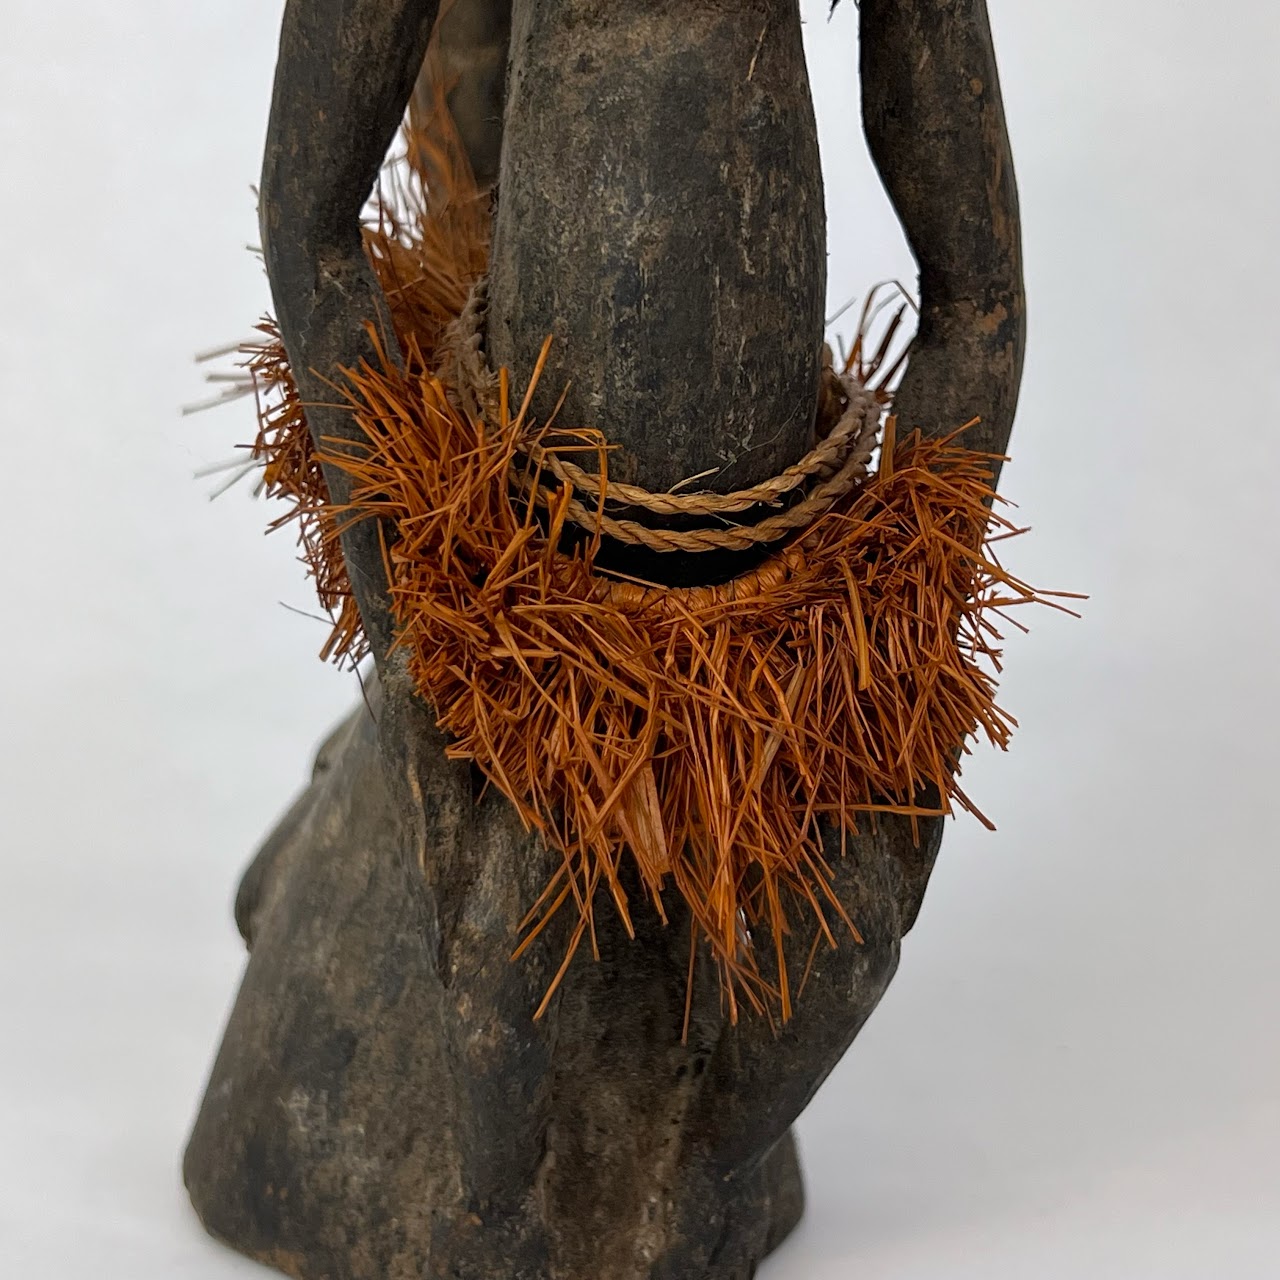 Papua New Guinean Sepik River Figure with Ancestral Bird Carving